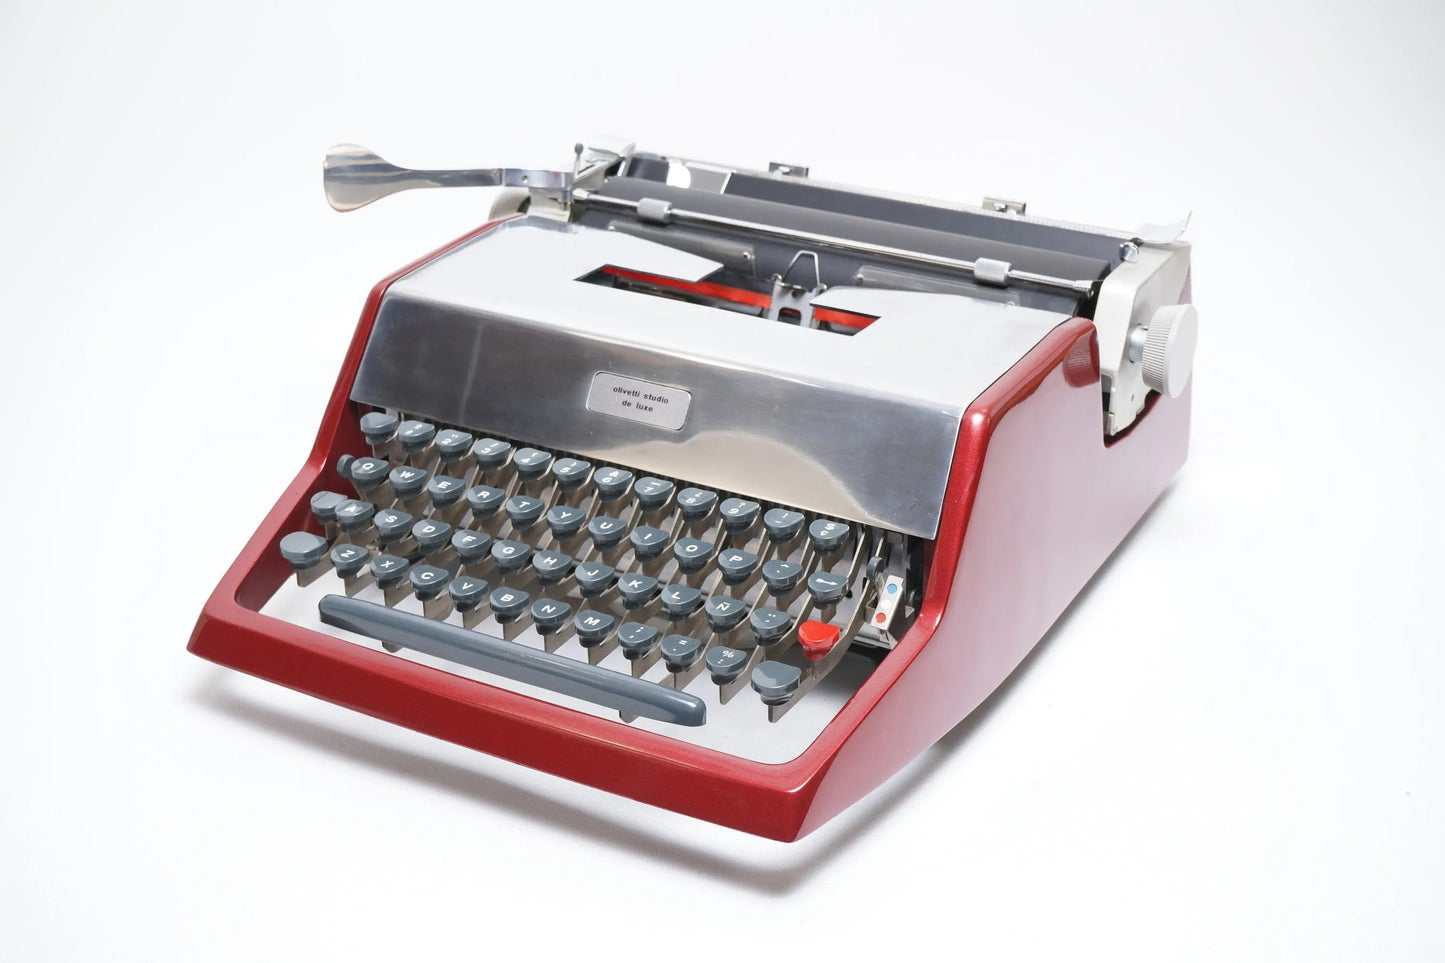 Limited Edition Olivetti Studio De Luxe Typewriter, Vintage, Manual Portable, Professionally Serviced by Typewriter.Company - ElGranero Typewriter.Company